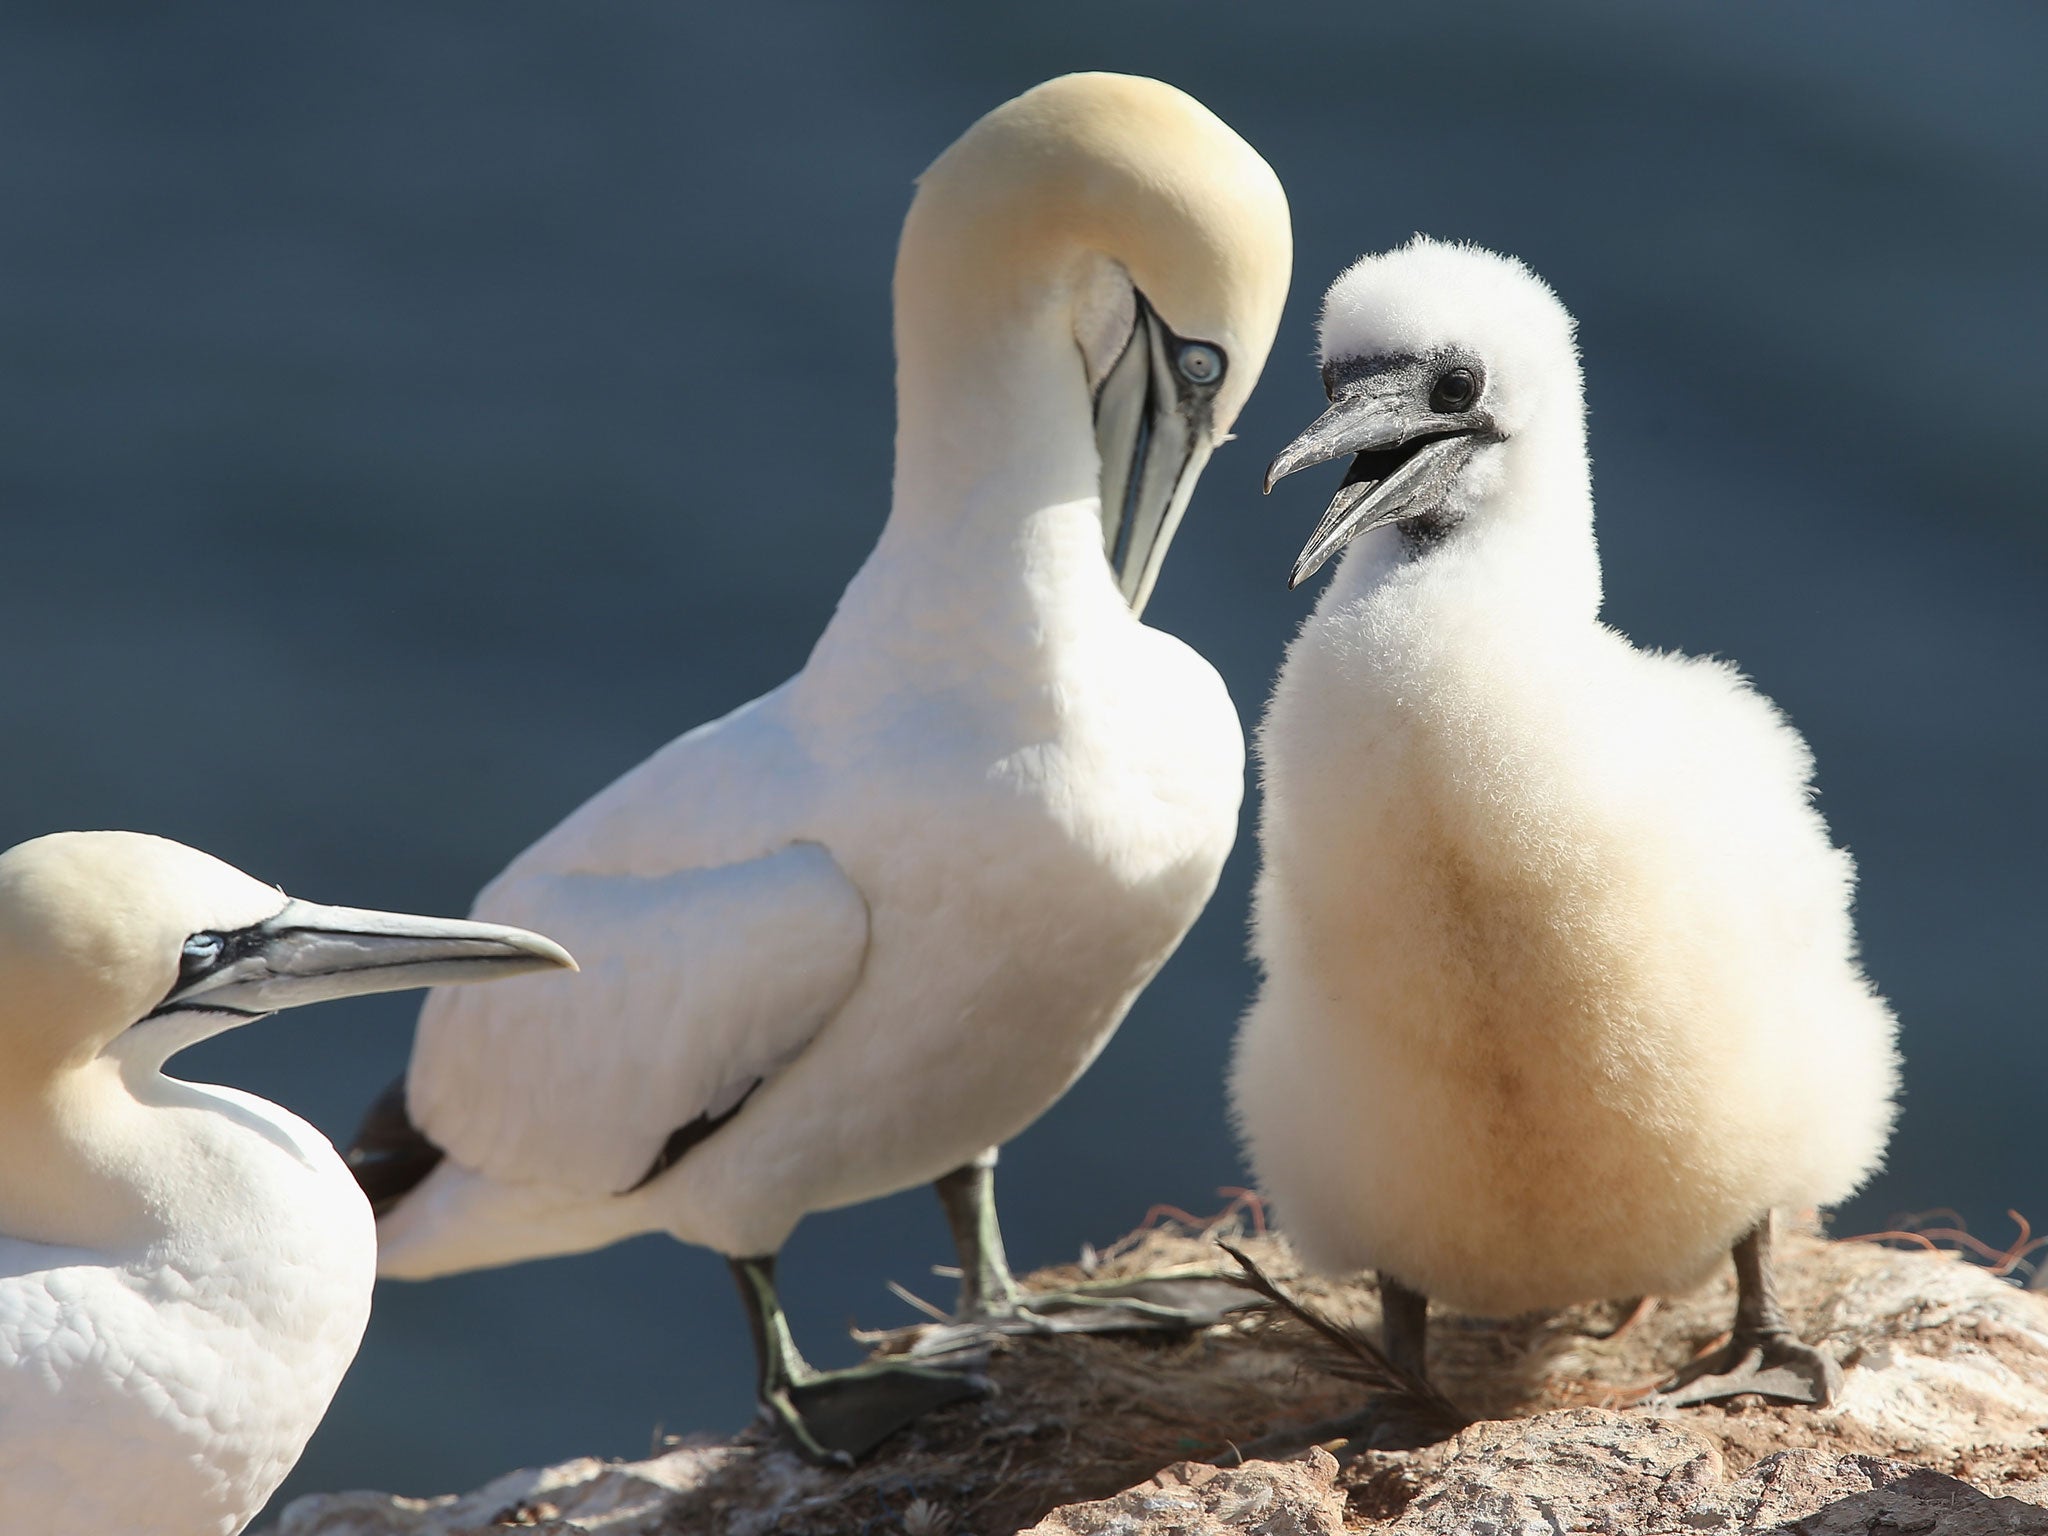 A baby northern gannet stands next to one of its parents